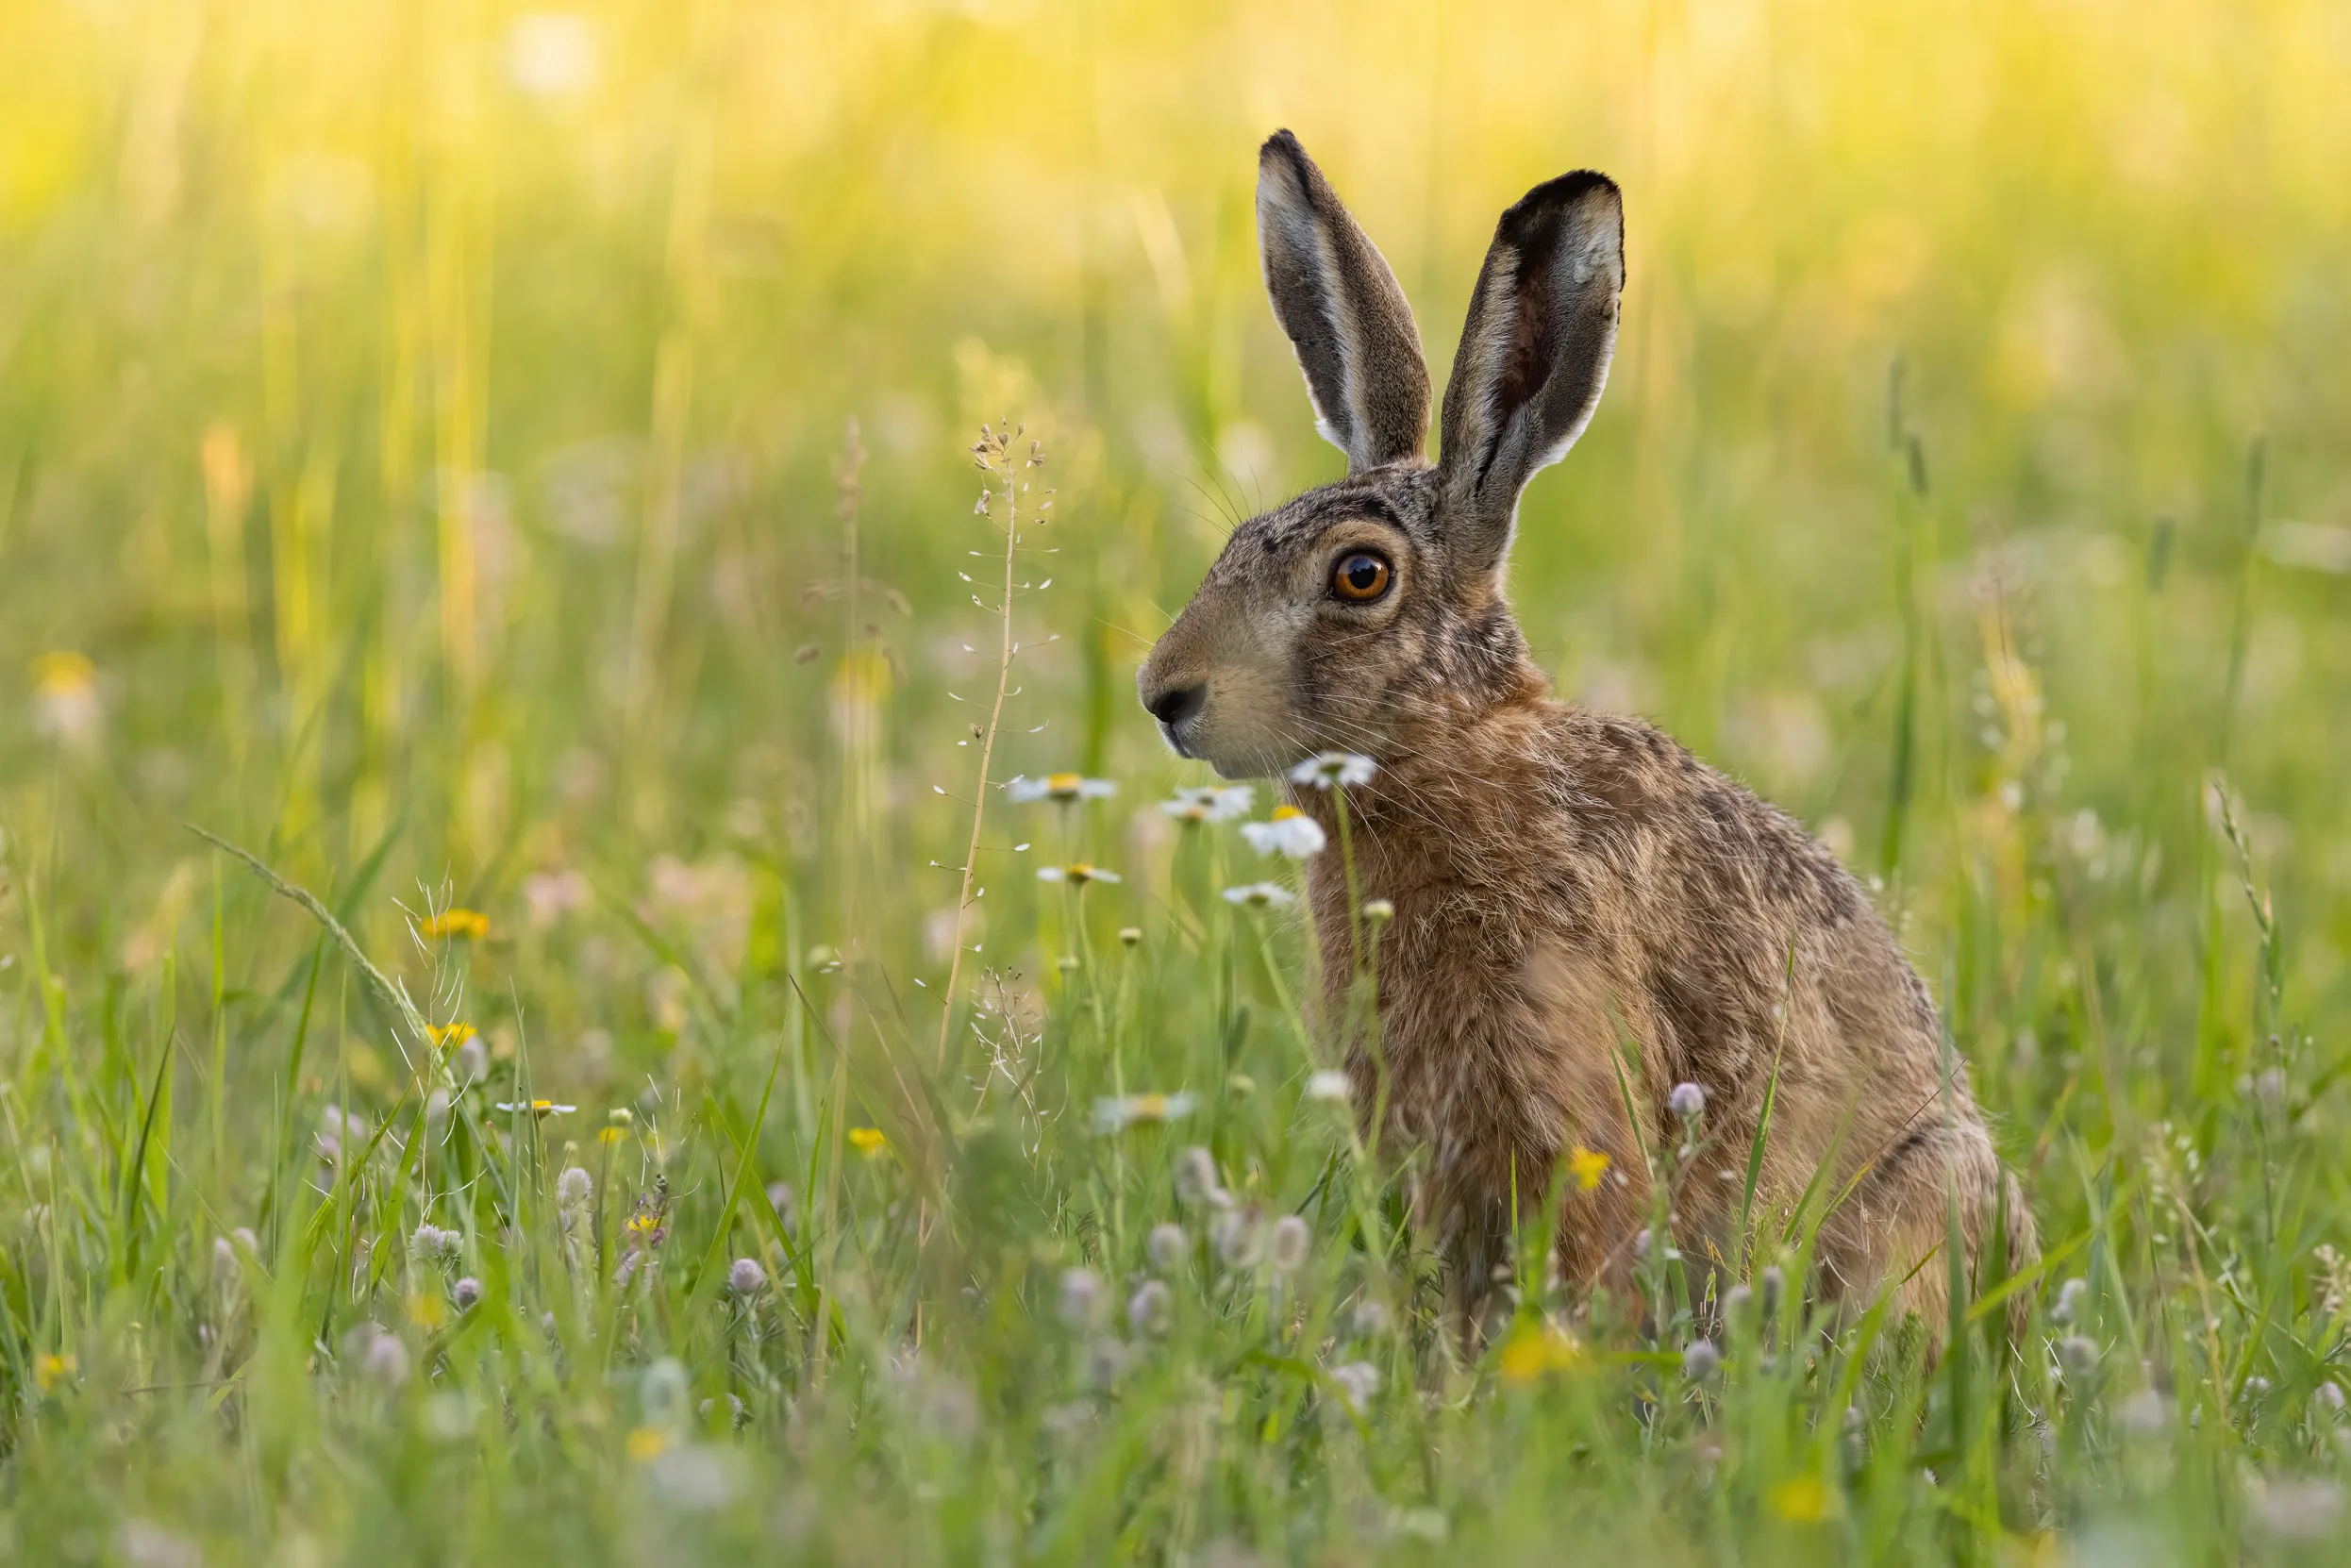 A Brown Hare in a meadow of green grass and yellow flowers.